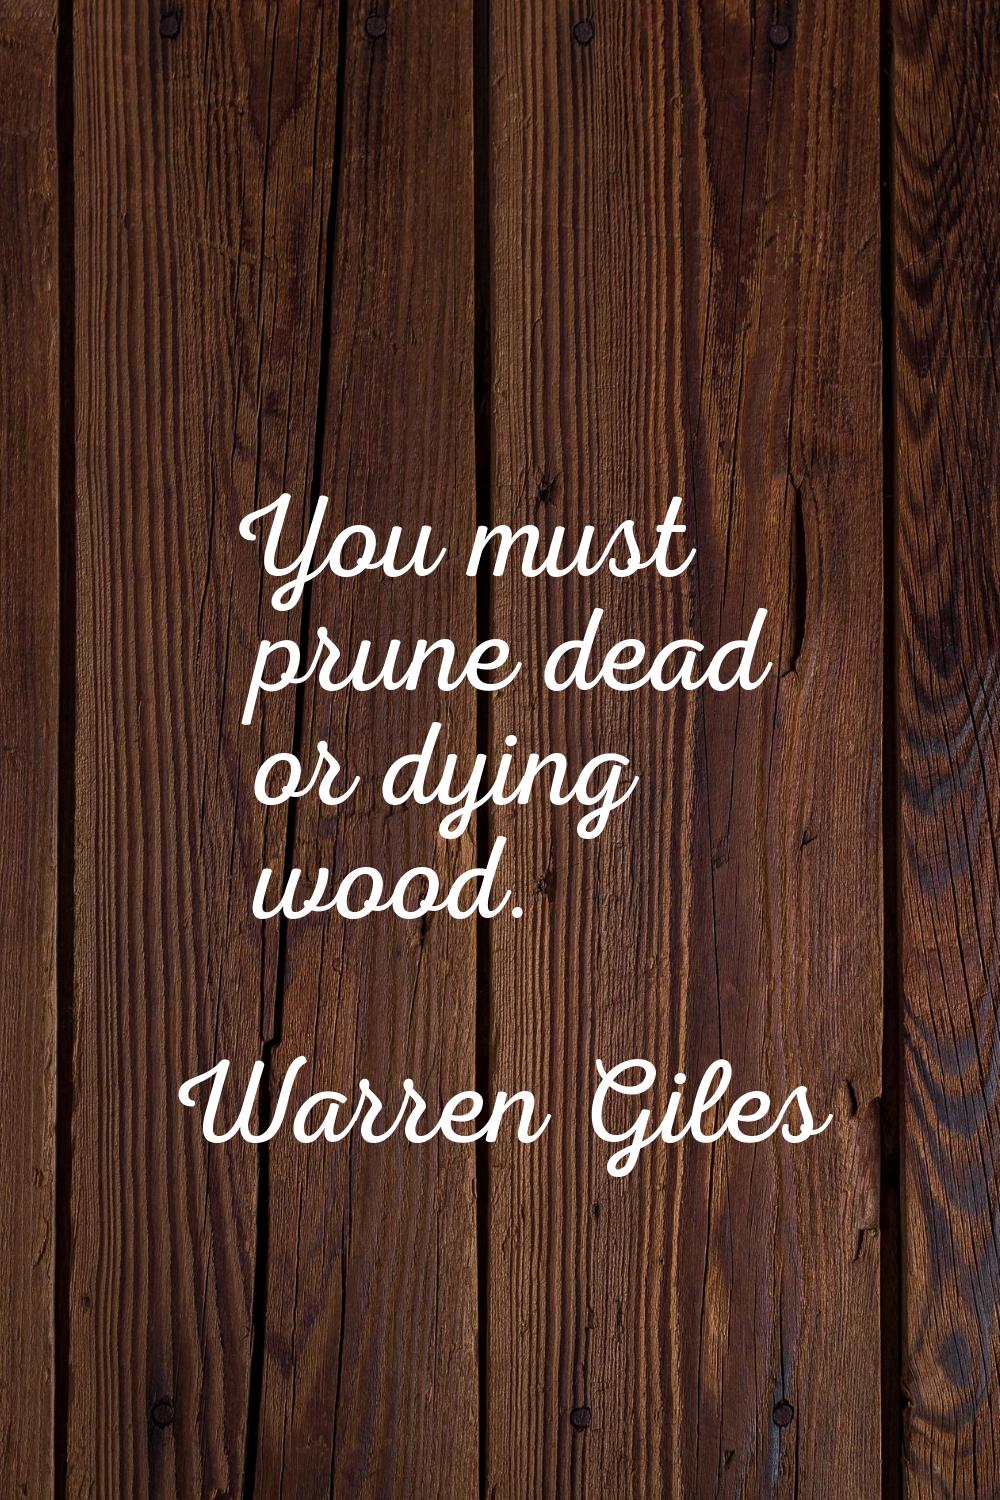 You must prune dead or dying wood.